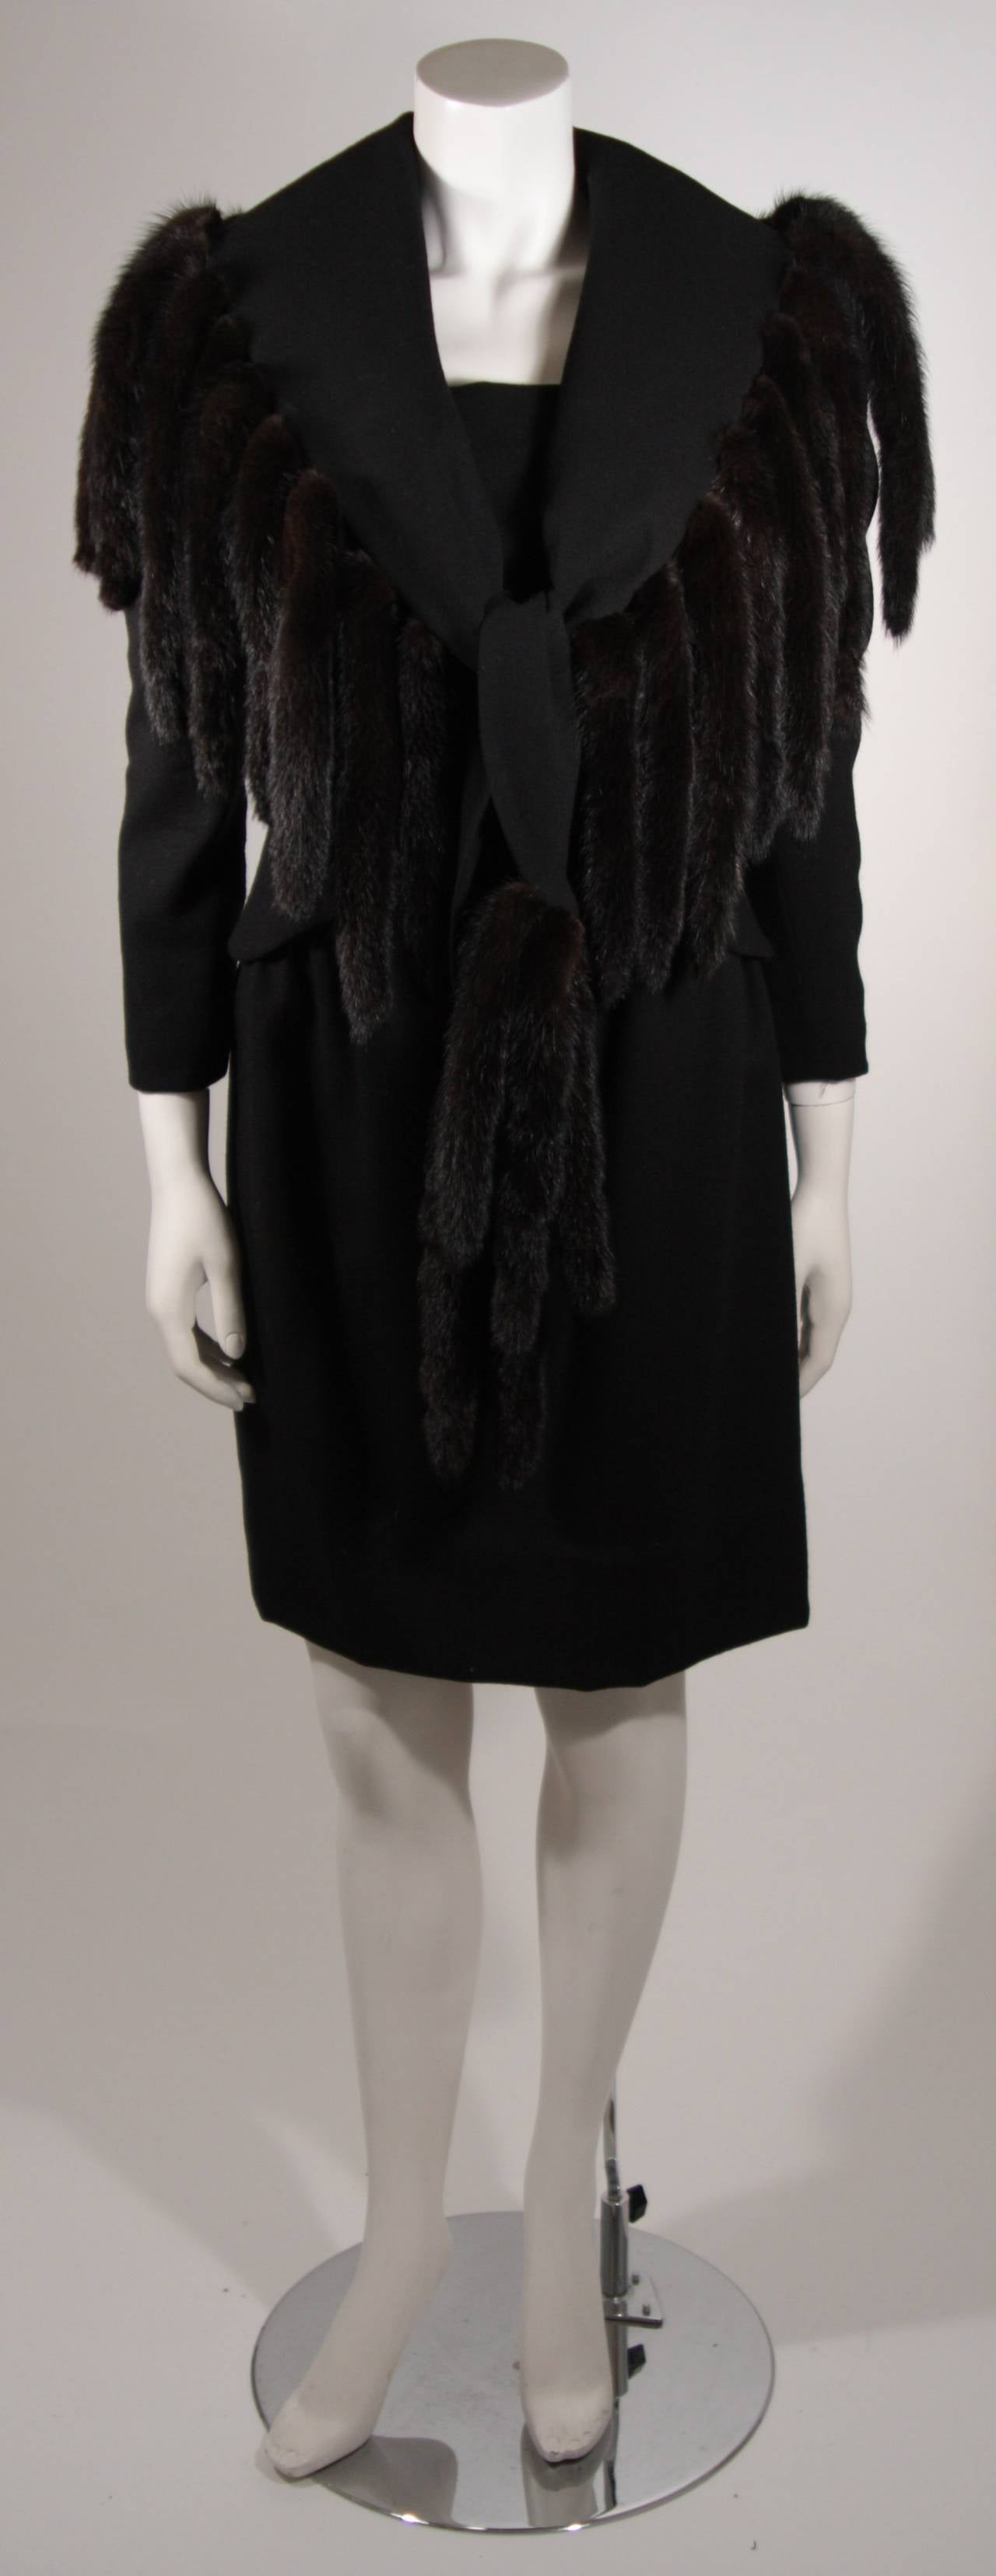 This Travilla design ensemble features two pieces. The wonderful jacket has a stunning mink trim and center front button closures. The dress is a classic style and features a center back zipper closure. Composed of a black non stretch wool.